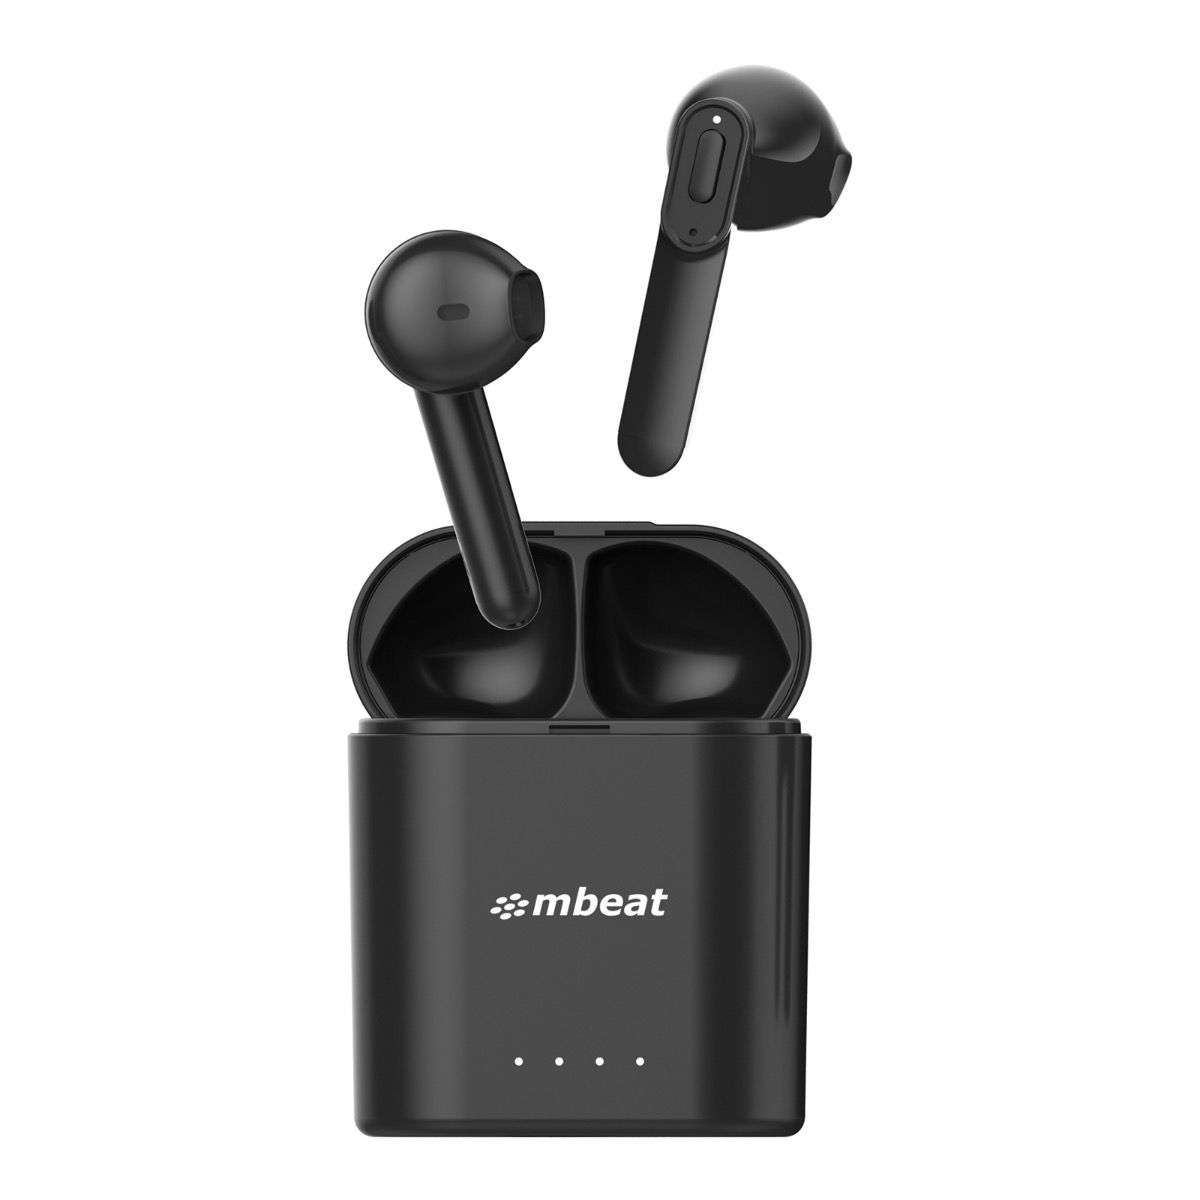 mbeat® E1 True Wireless Earbuds - Up to 4hr Play time, 14hr Charge Case, Easy Pair